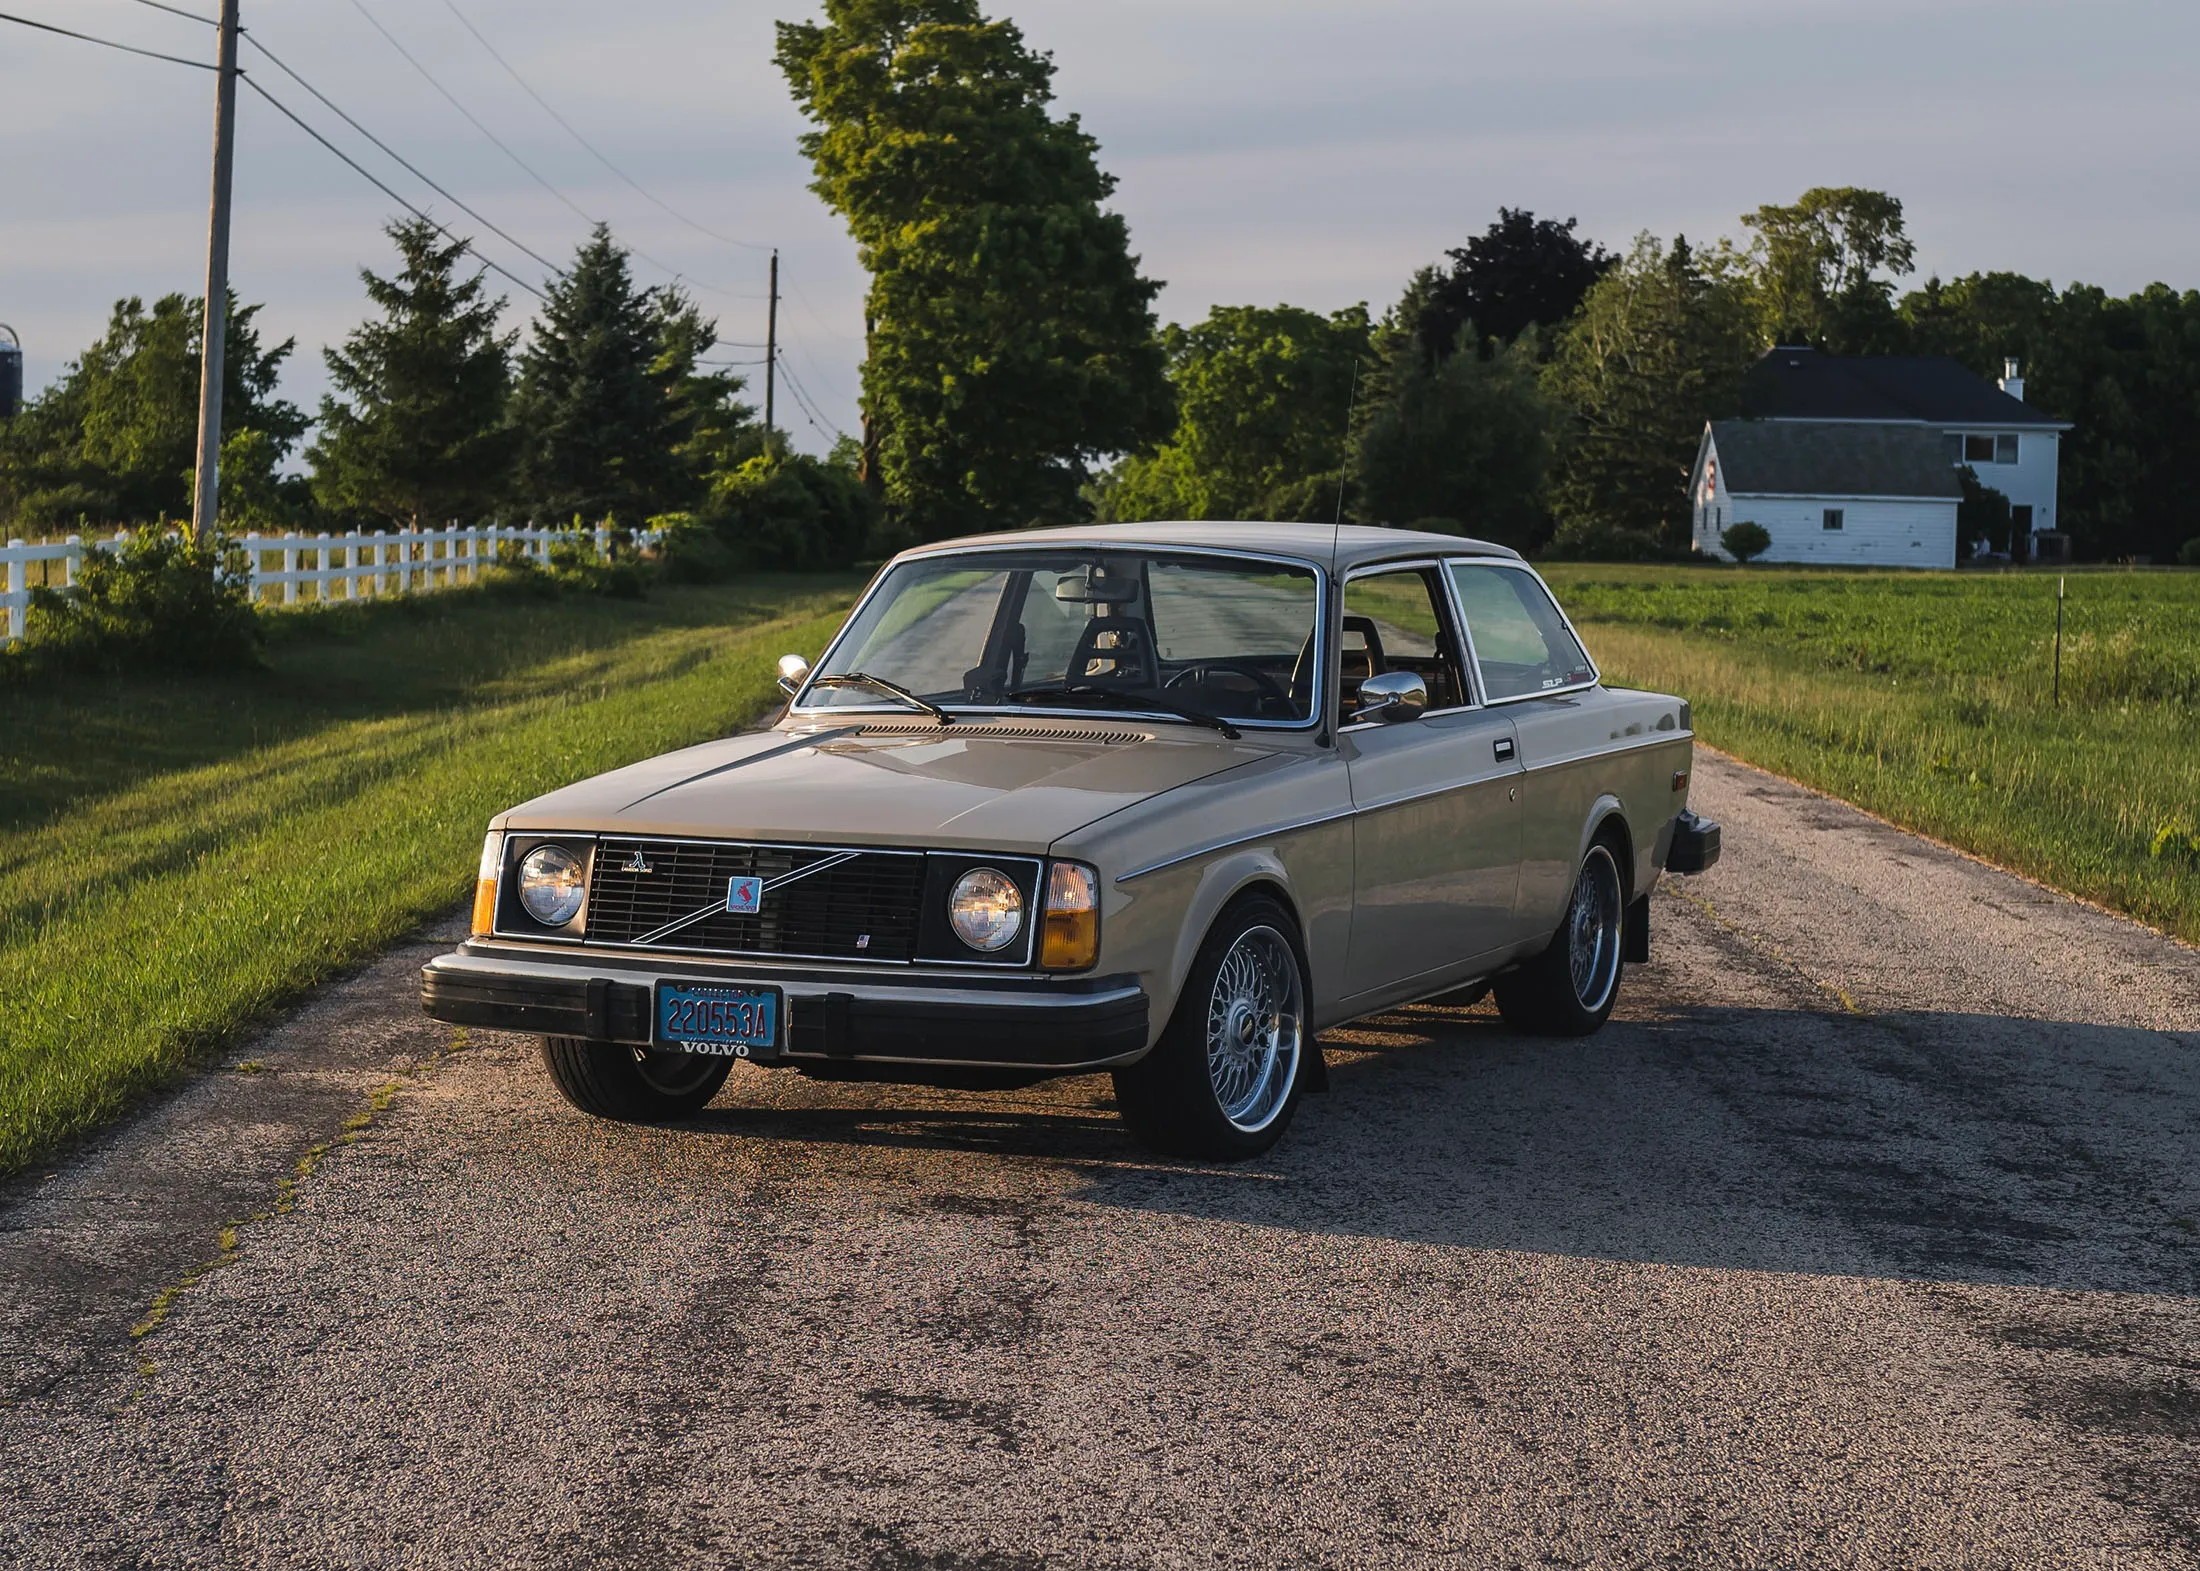 Henry Mcdonoughs Ls Swapped Volvo Is Everything You Want In A